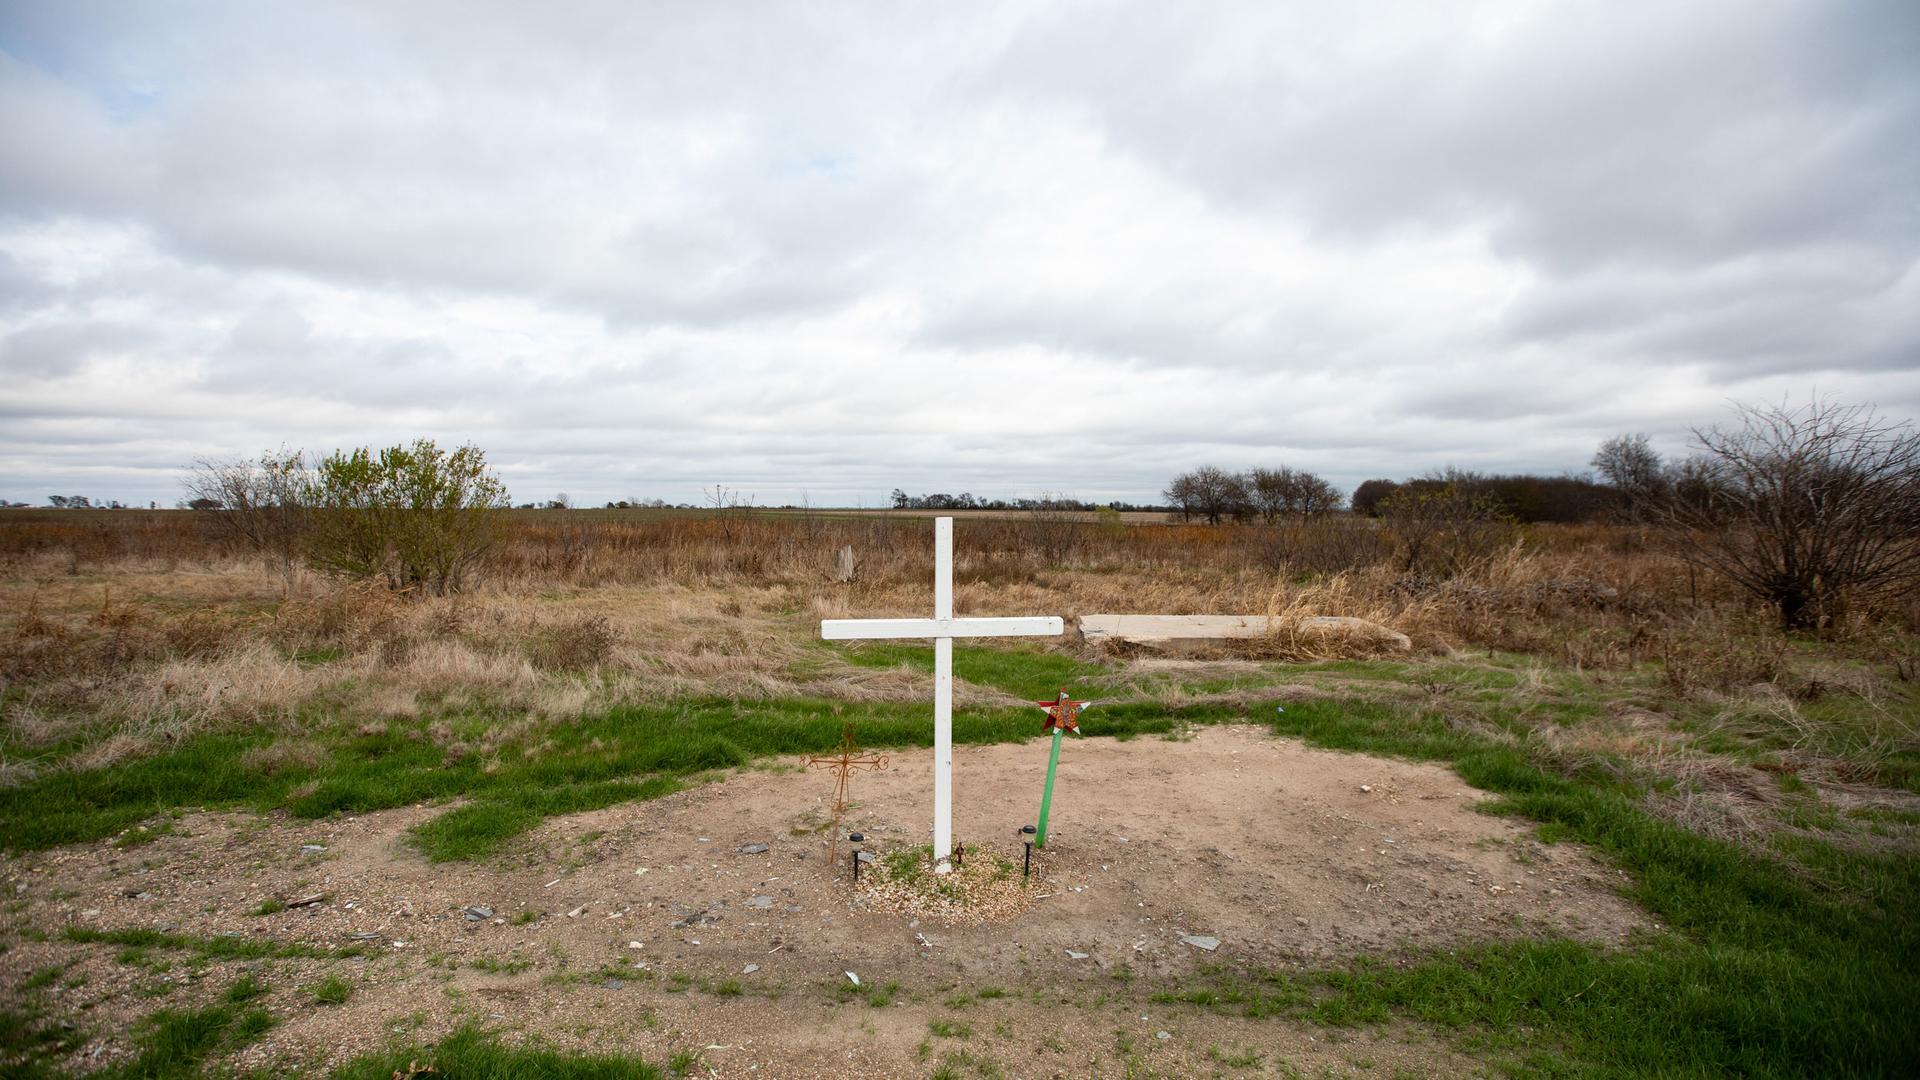 A single white cross is shown on a small dirt area amongst a wide open grassy field.